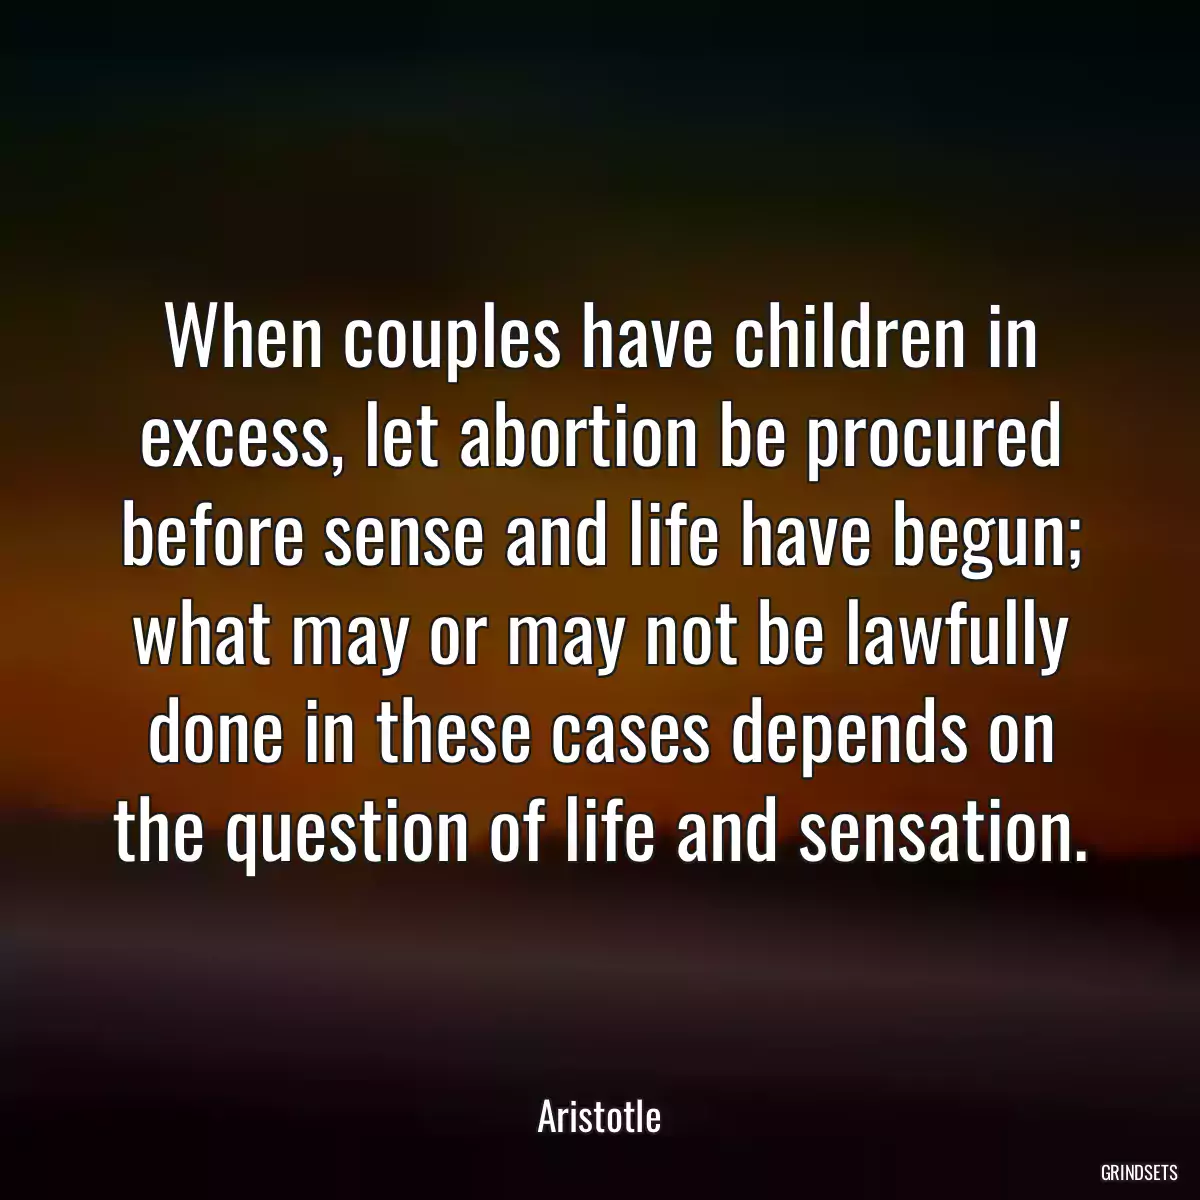 When couples have children in excess, let abortion be procured before sense and life have begun; what may or may not be lawfully done in these cases depends on the question of life and sensation.